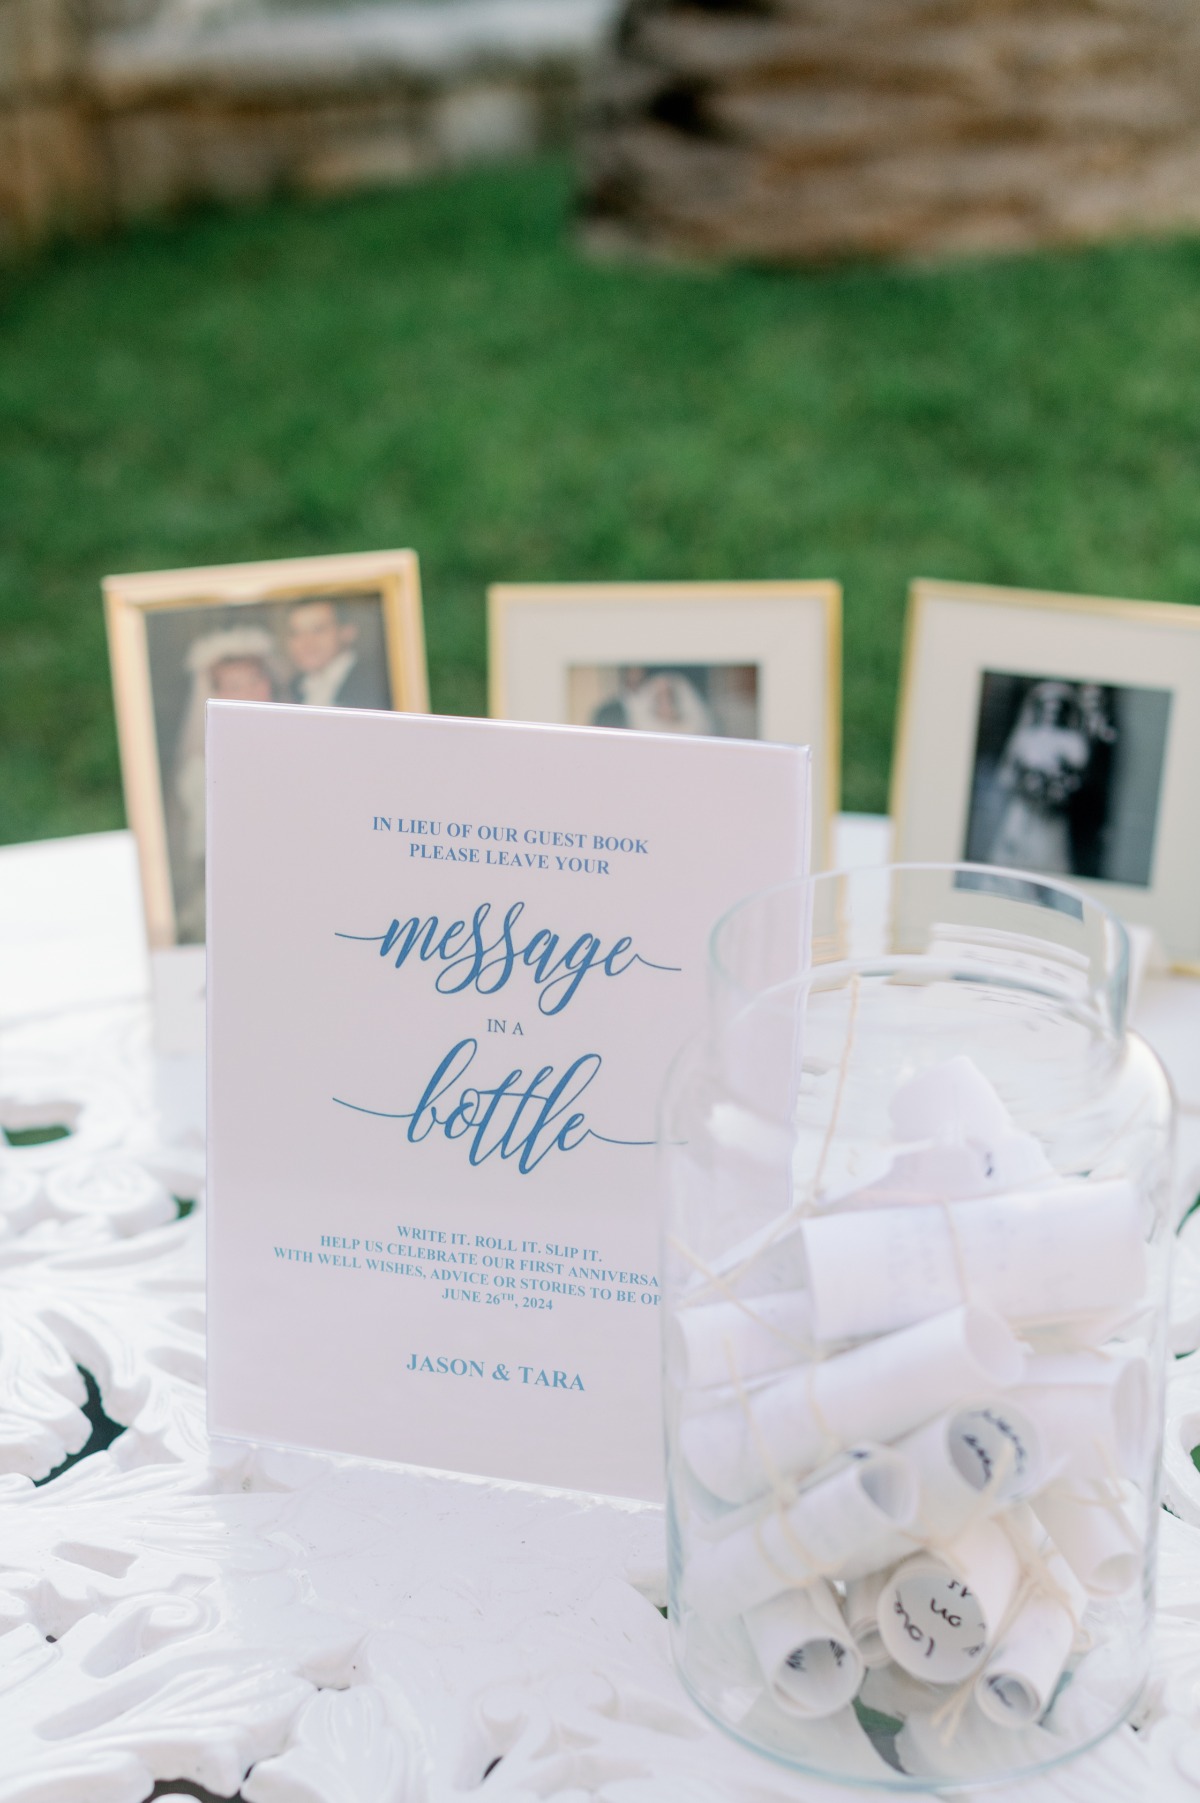 message in a bottle guest book 